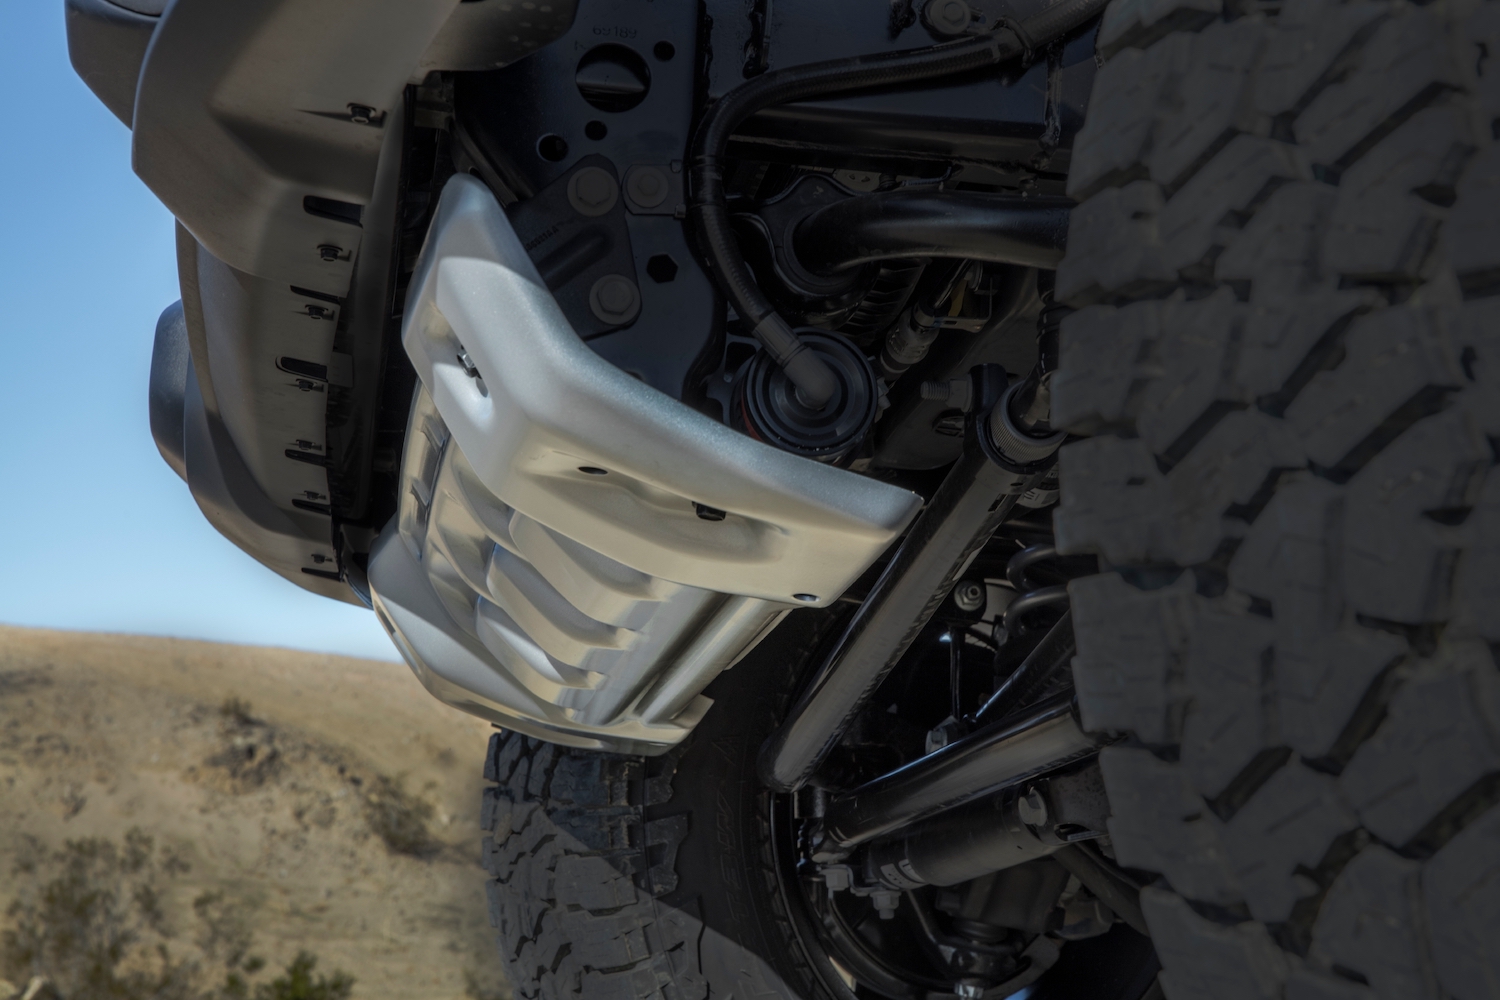 Detail shot of the front suspension of a Jeep Gladiator pickup truck.